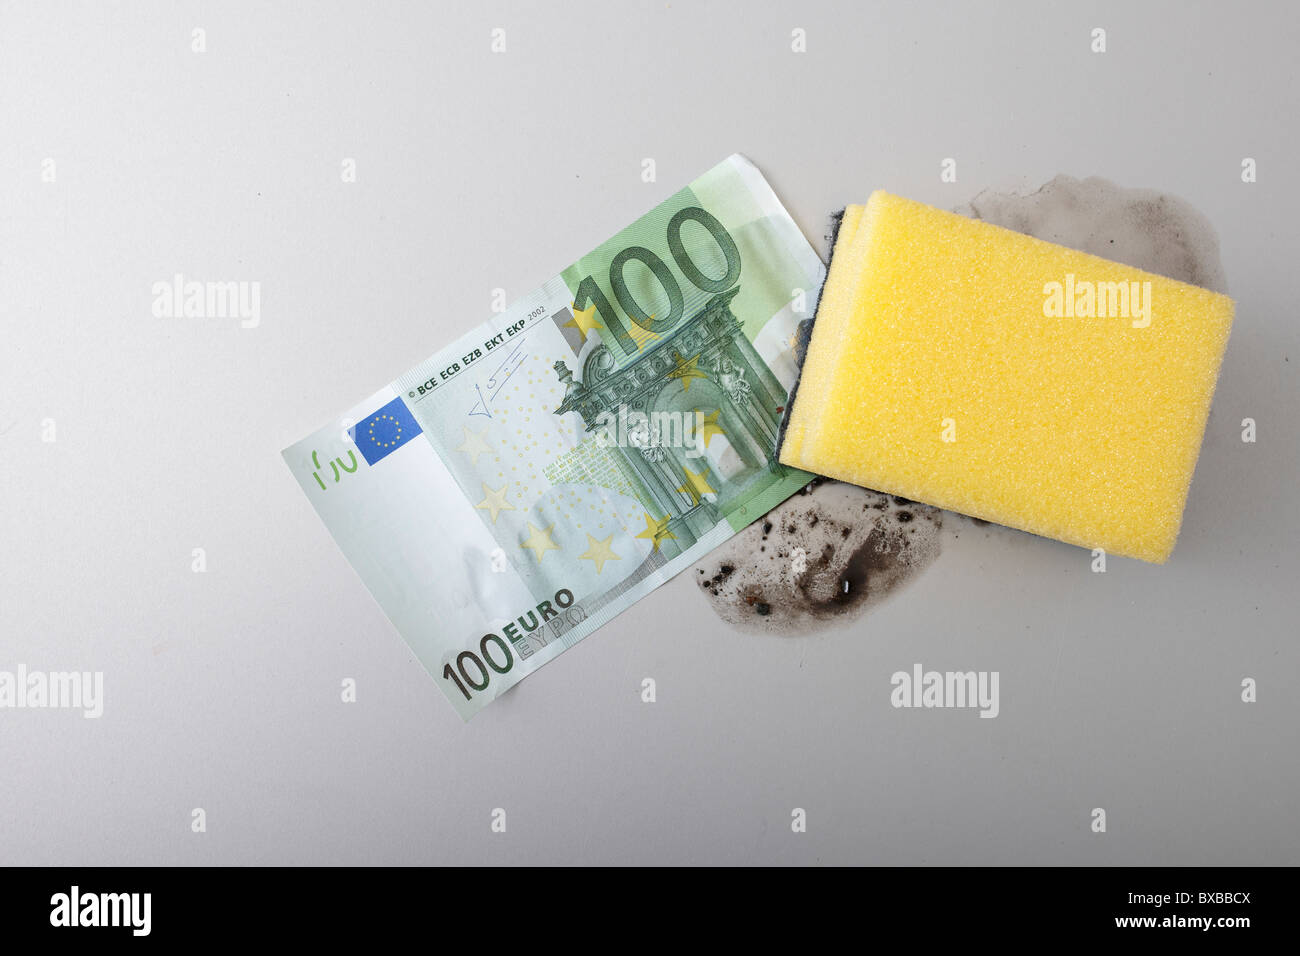 Banknote being cleaned with a sponge, symbolic image for dirty money Stock Photo